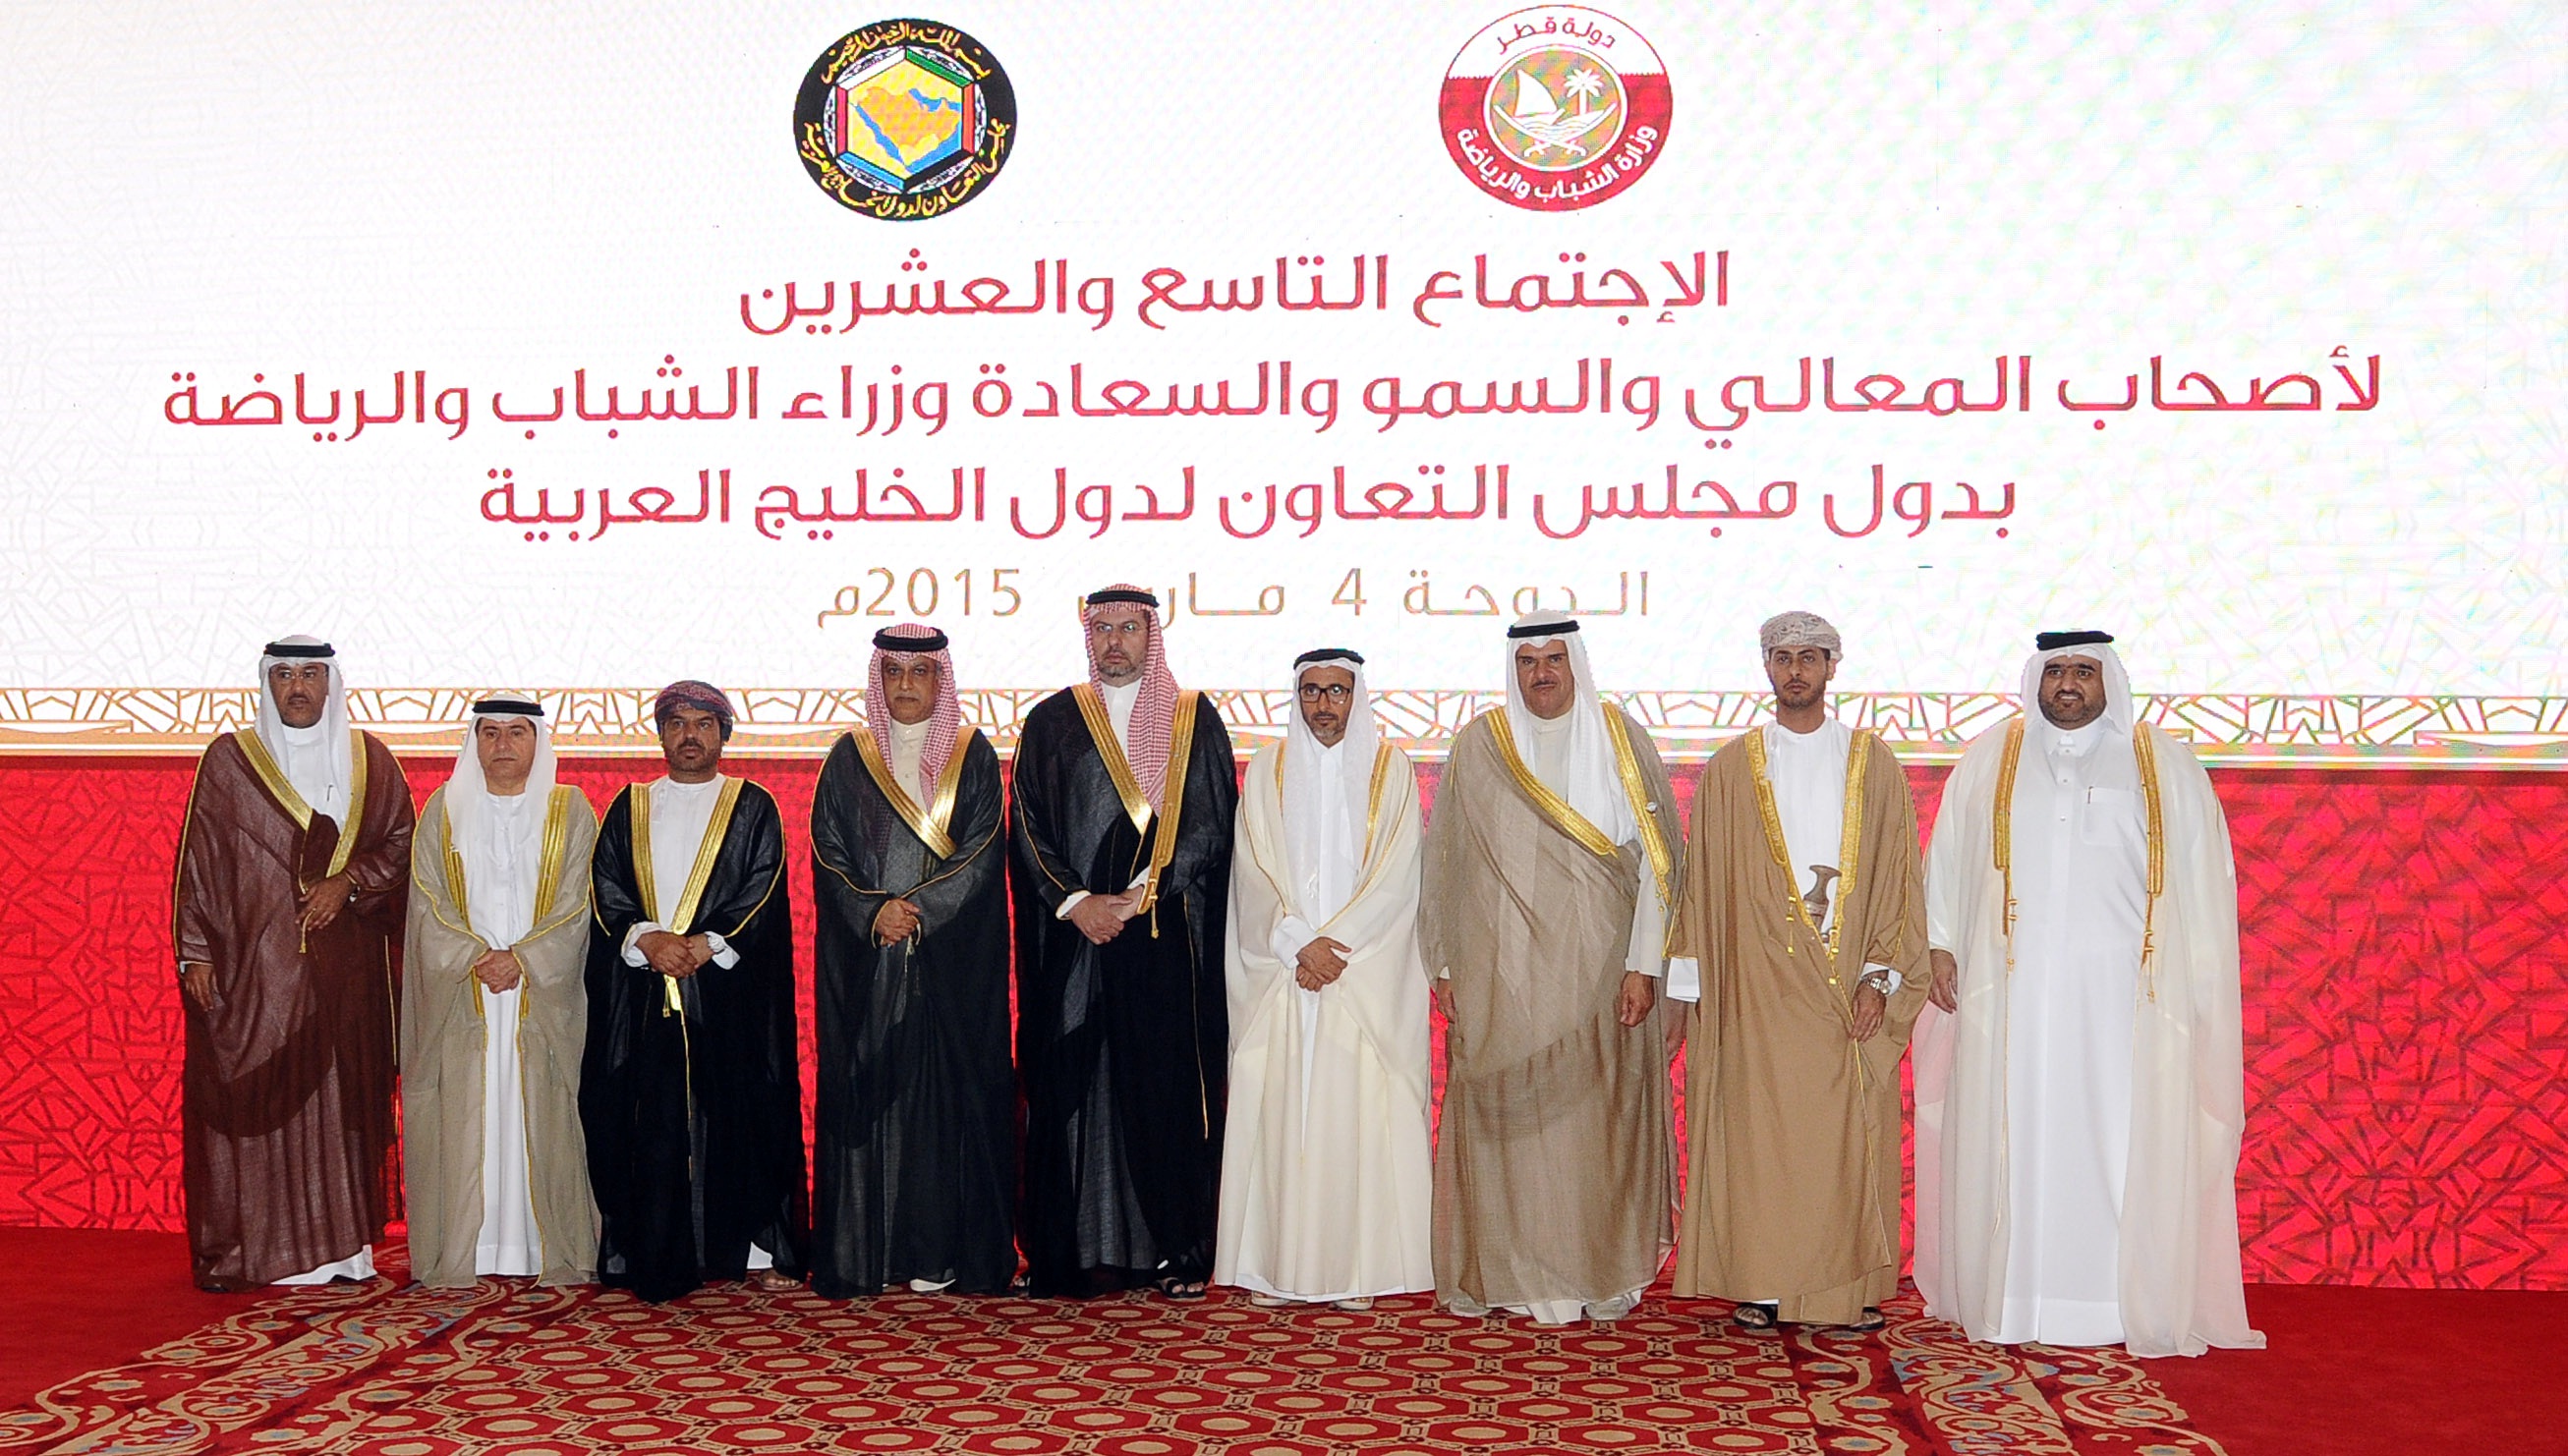 Ministers of sports and youth in the Gulf Cooperation Council (GCC) during 29th meeting of GCC ministers of youth and sports 